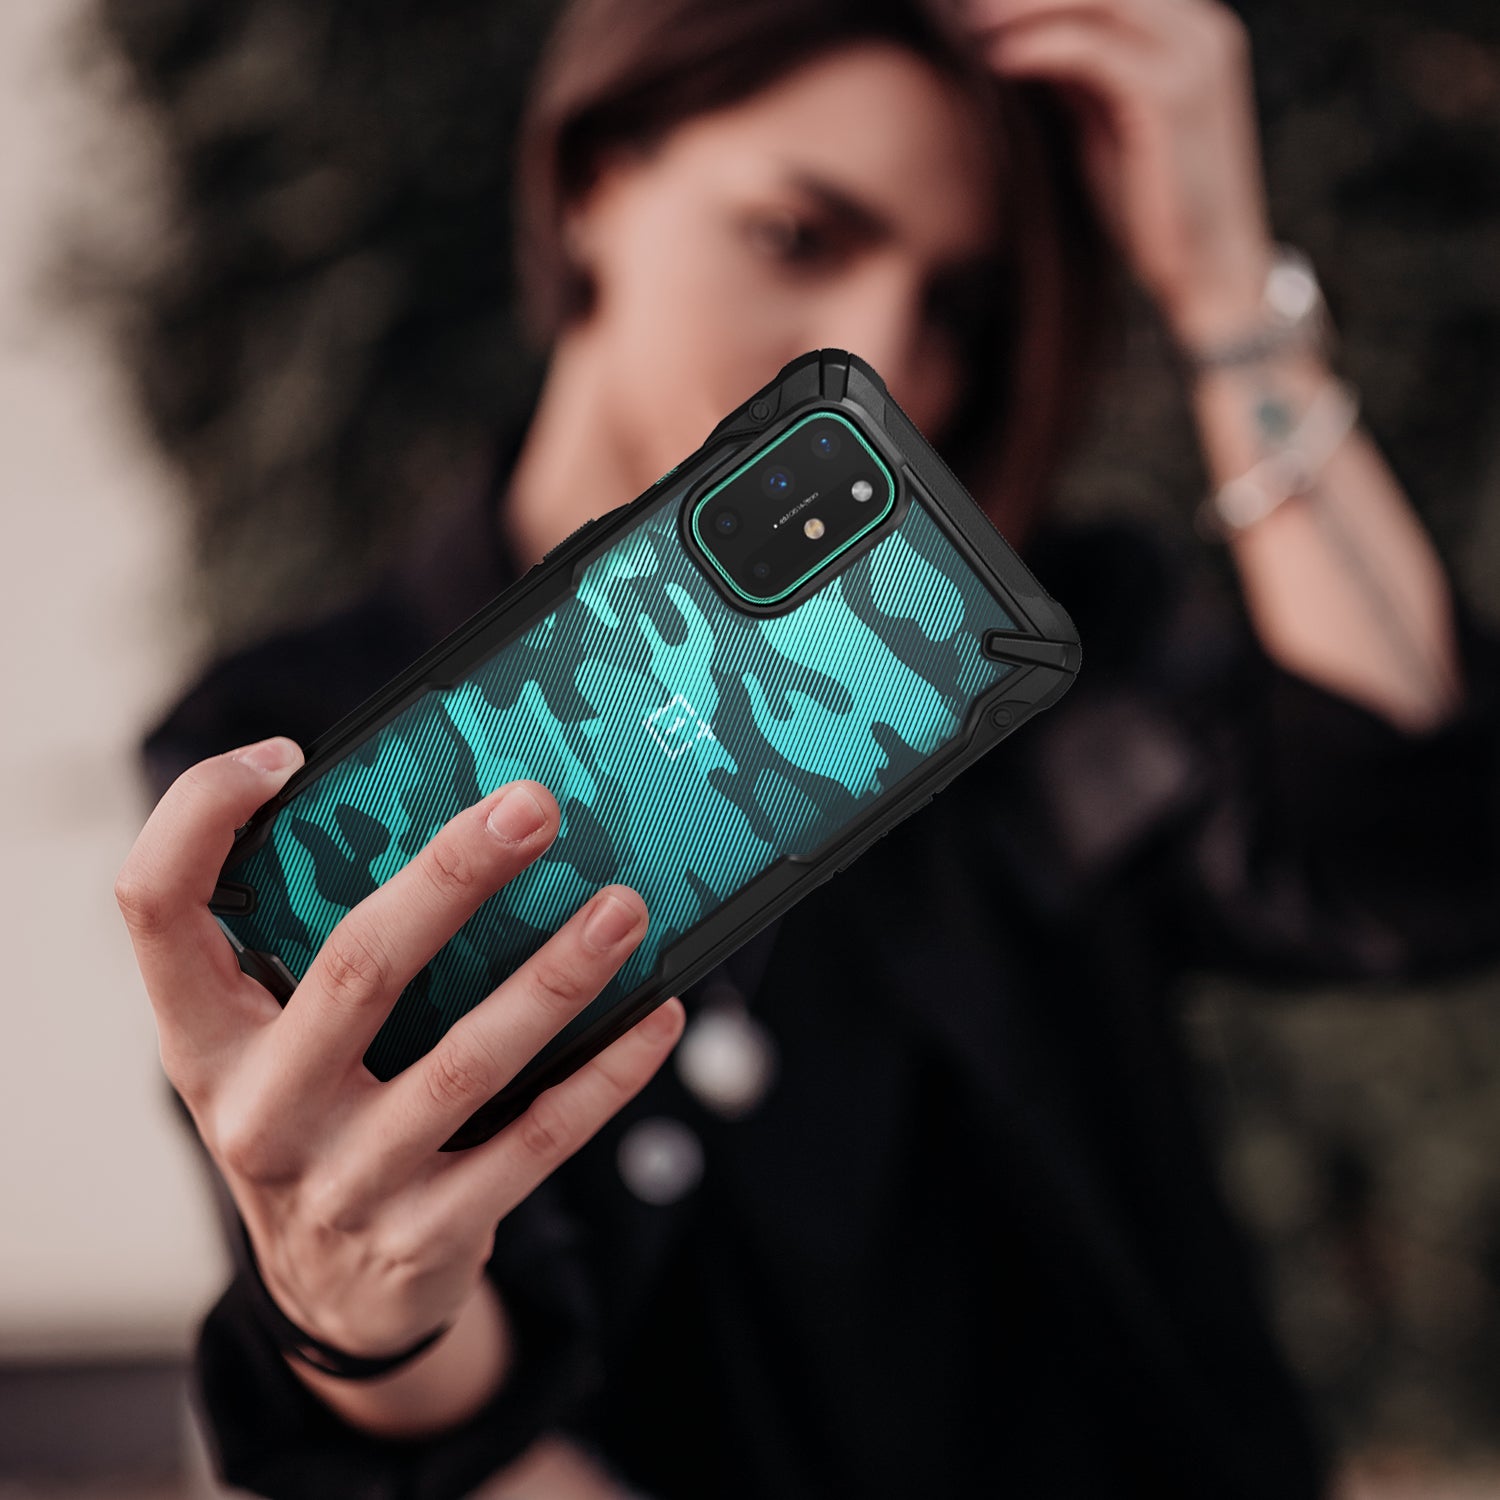 oneplus 8t ringke fusion-x case cover